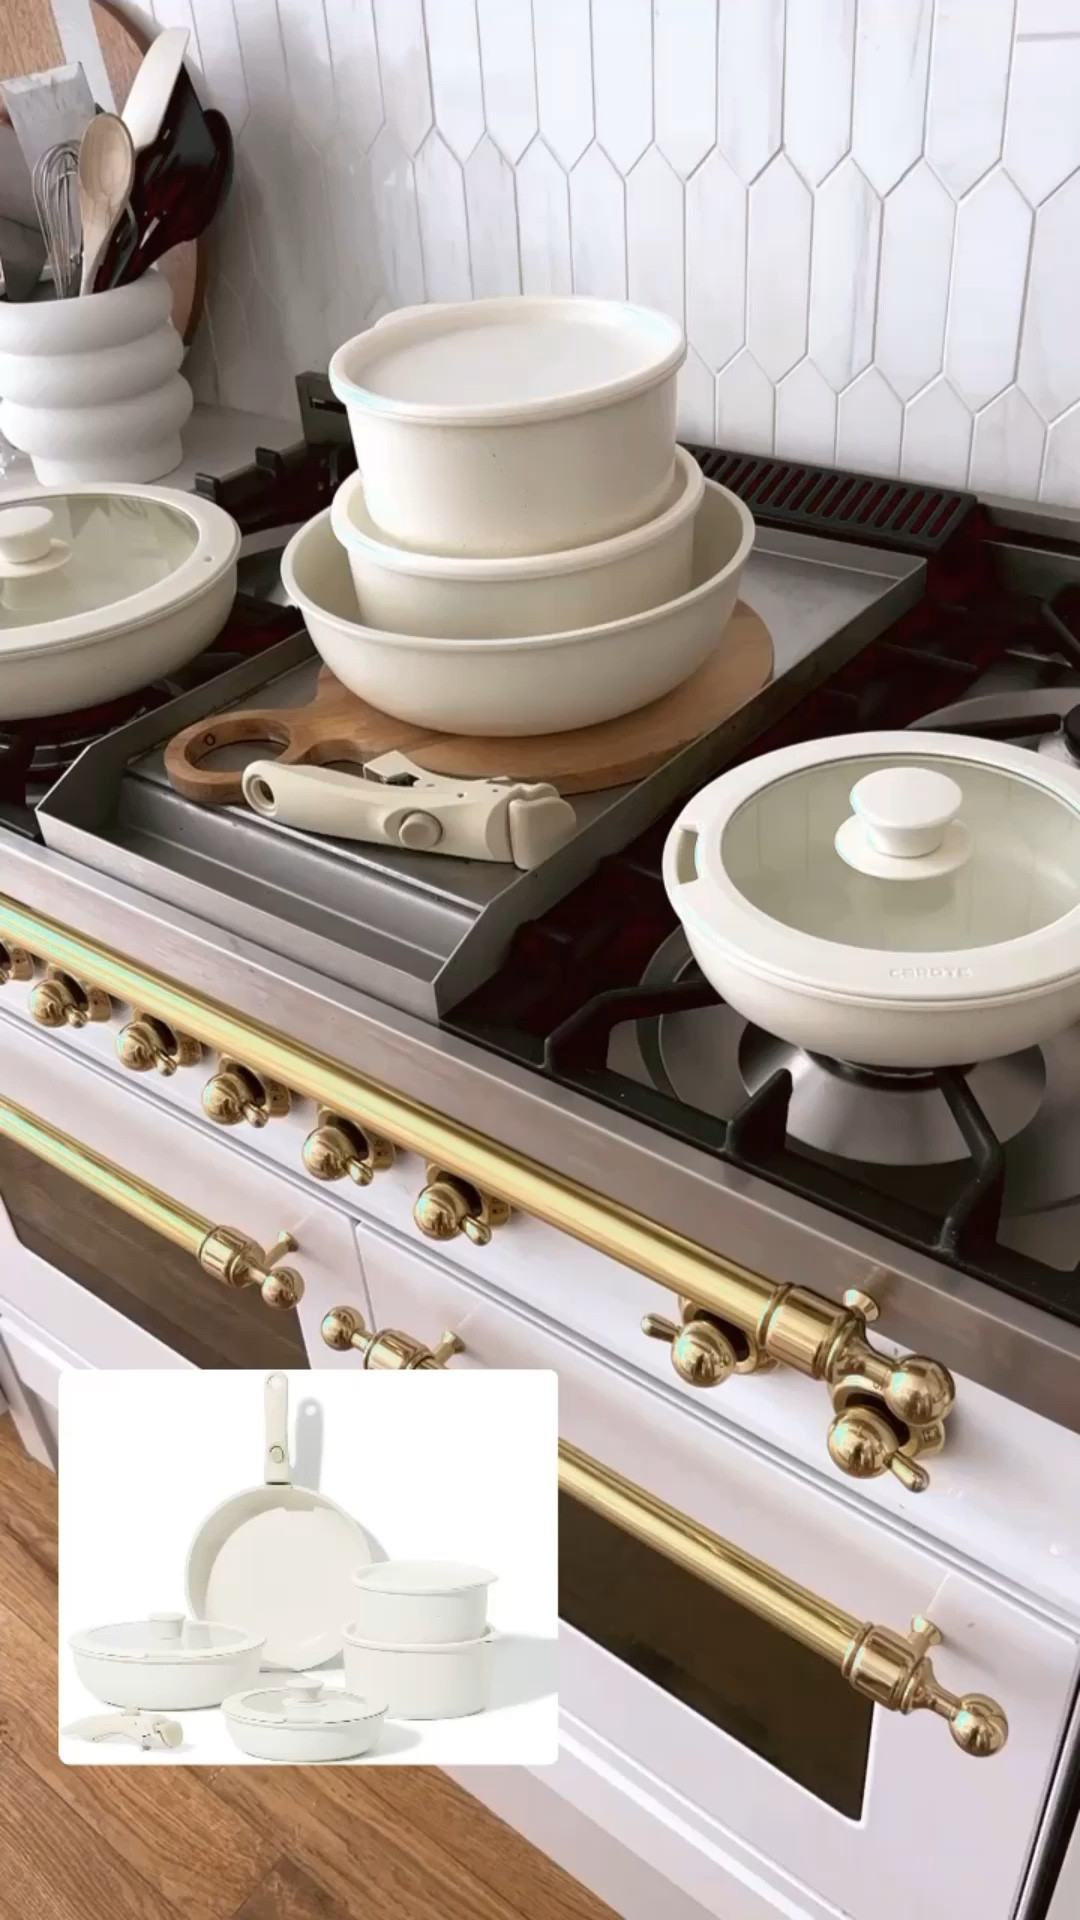 This Beginner-Friendly Carote Cookware Set Is on Sale for Prime